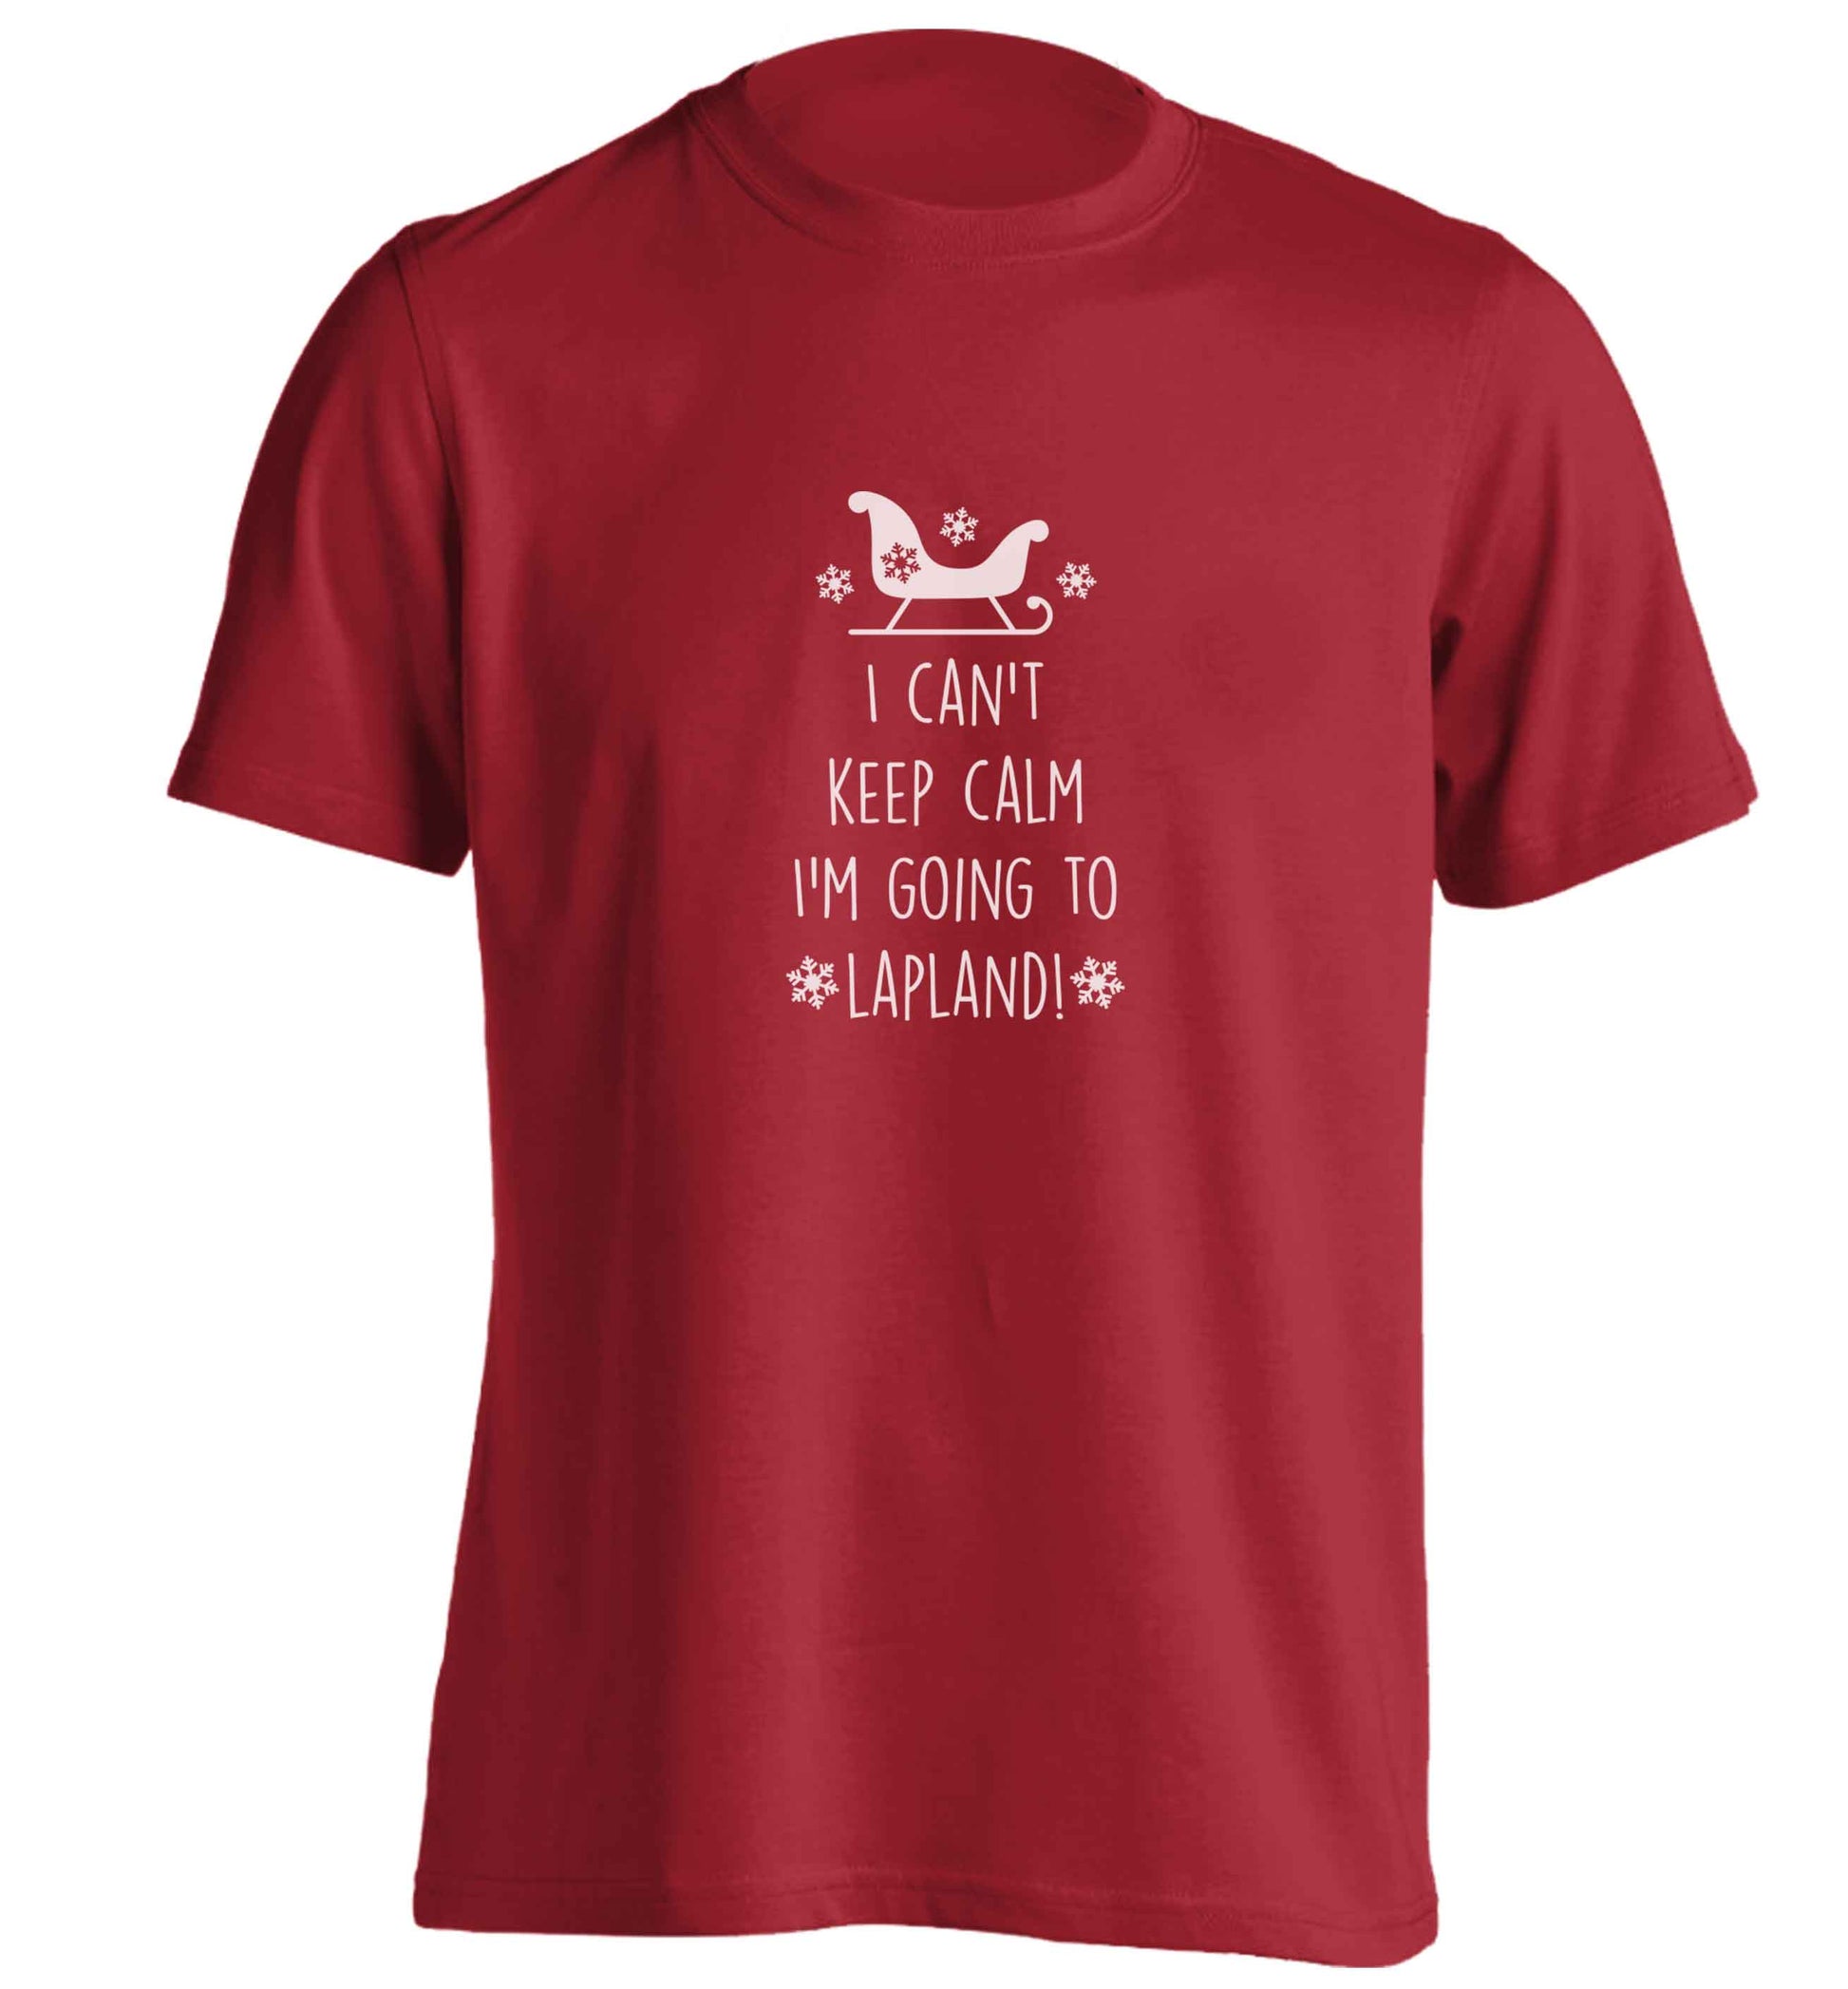 I can't keep calm I'm going to Lapland adults unisex red Tshirt 2XL